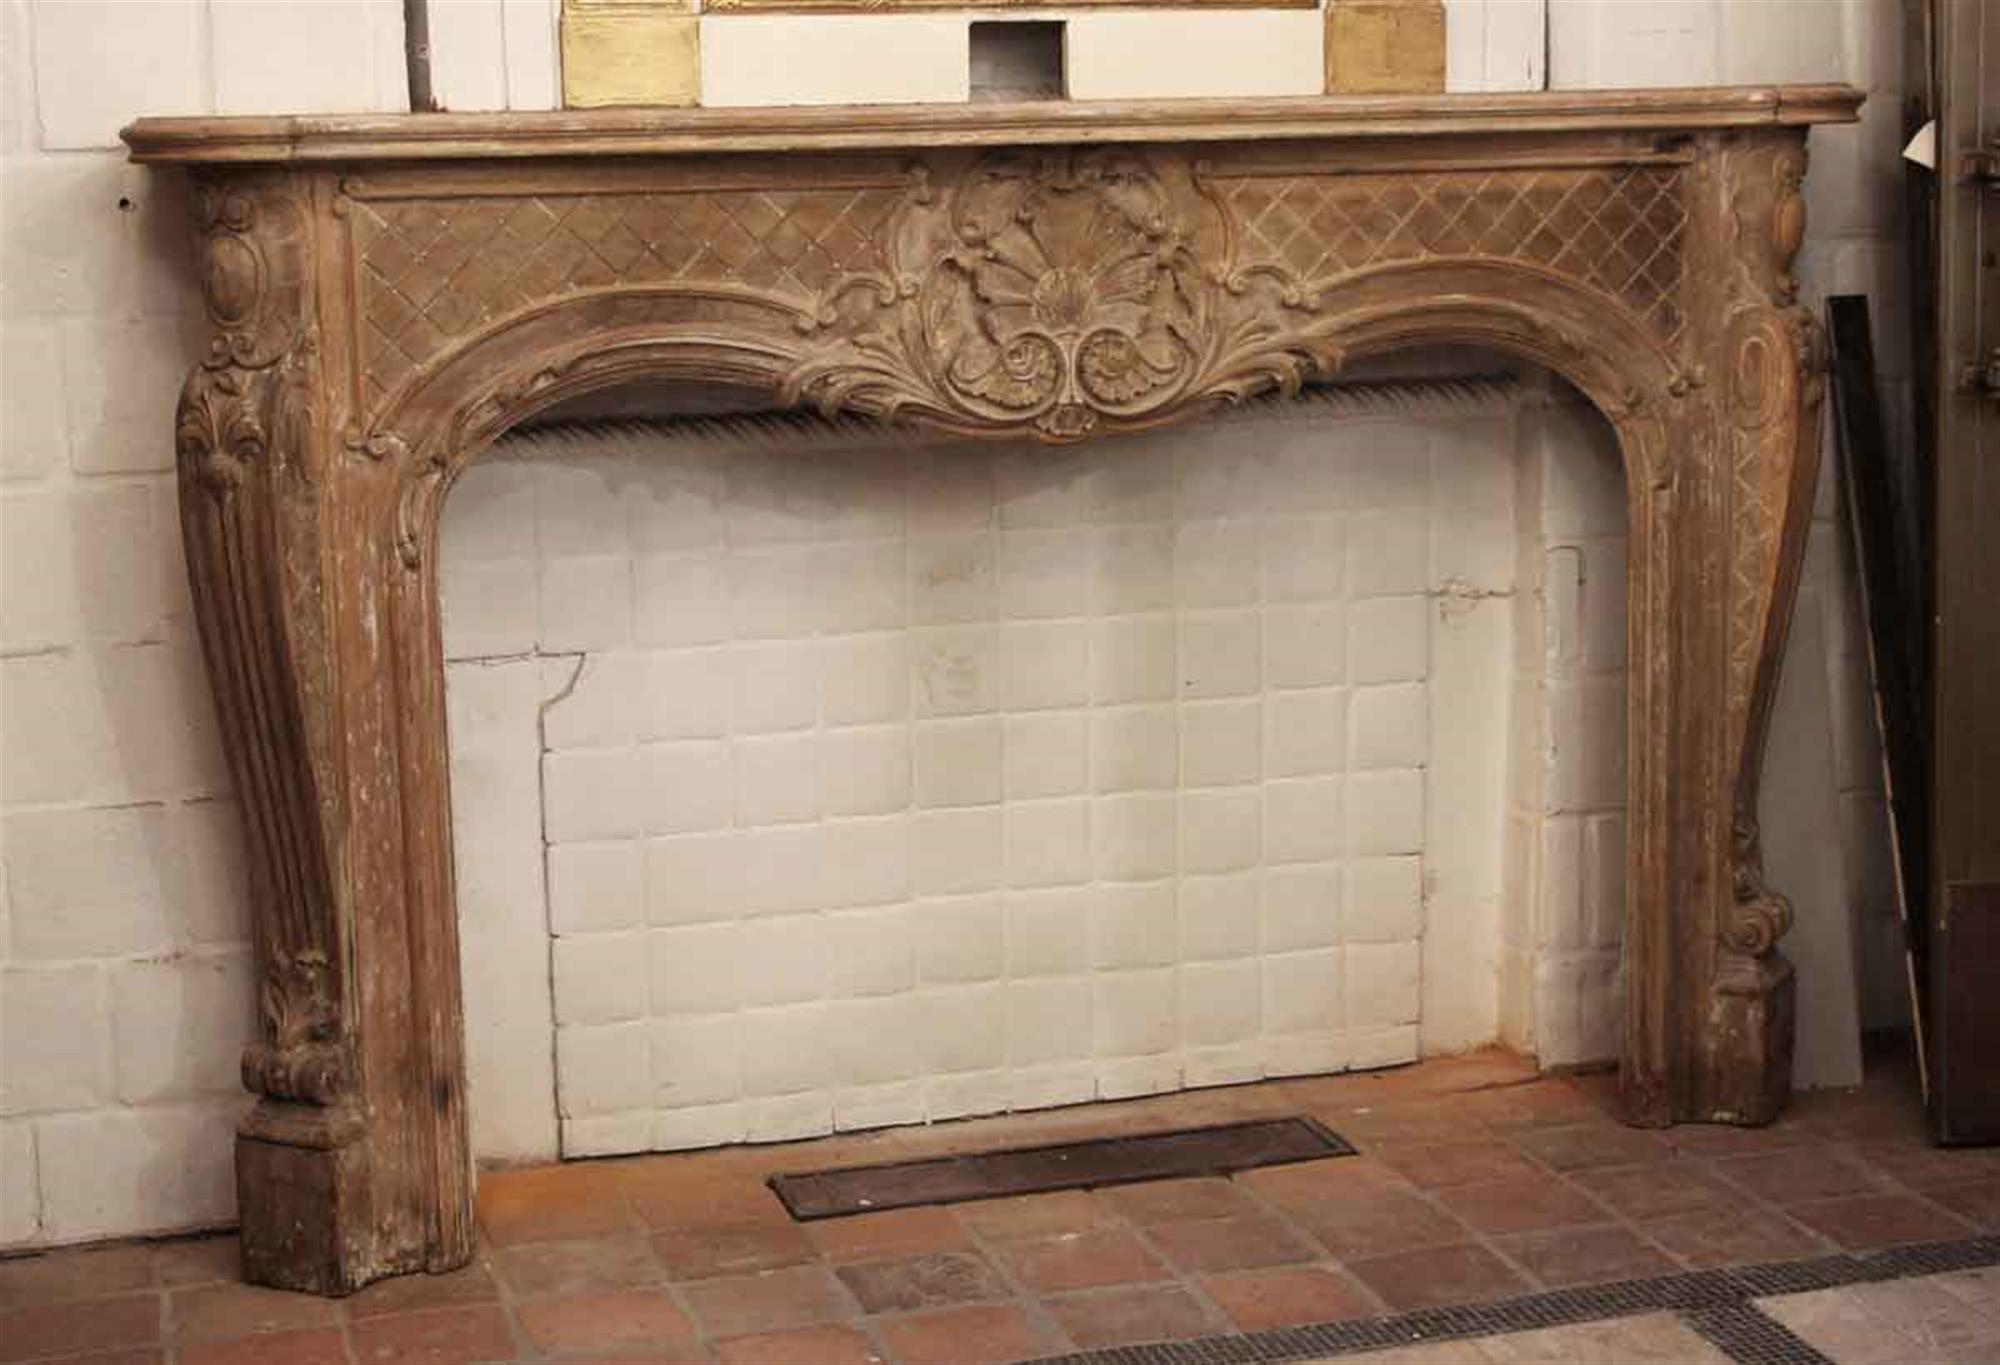 Large scale 19th century hand carved wooden mantel in the Louis XV style. Breast of mantel has carved lattice pattern and a centerpiece with shell floral and acanthus leaf detail. Fluted pilasters grace the sides with top mounted protruding ovals.